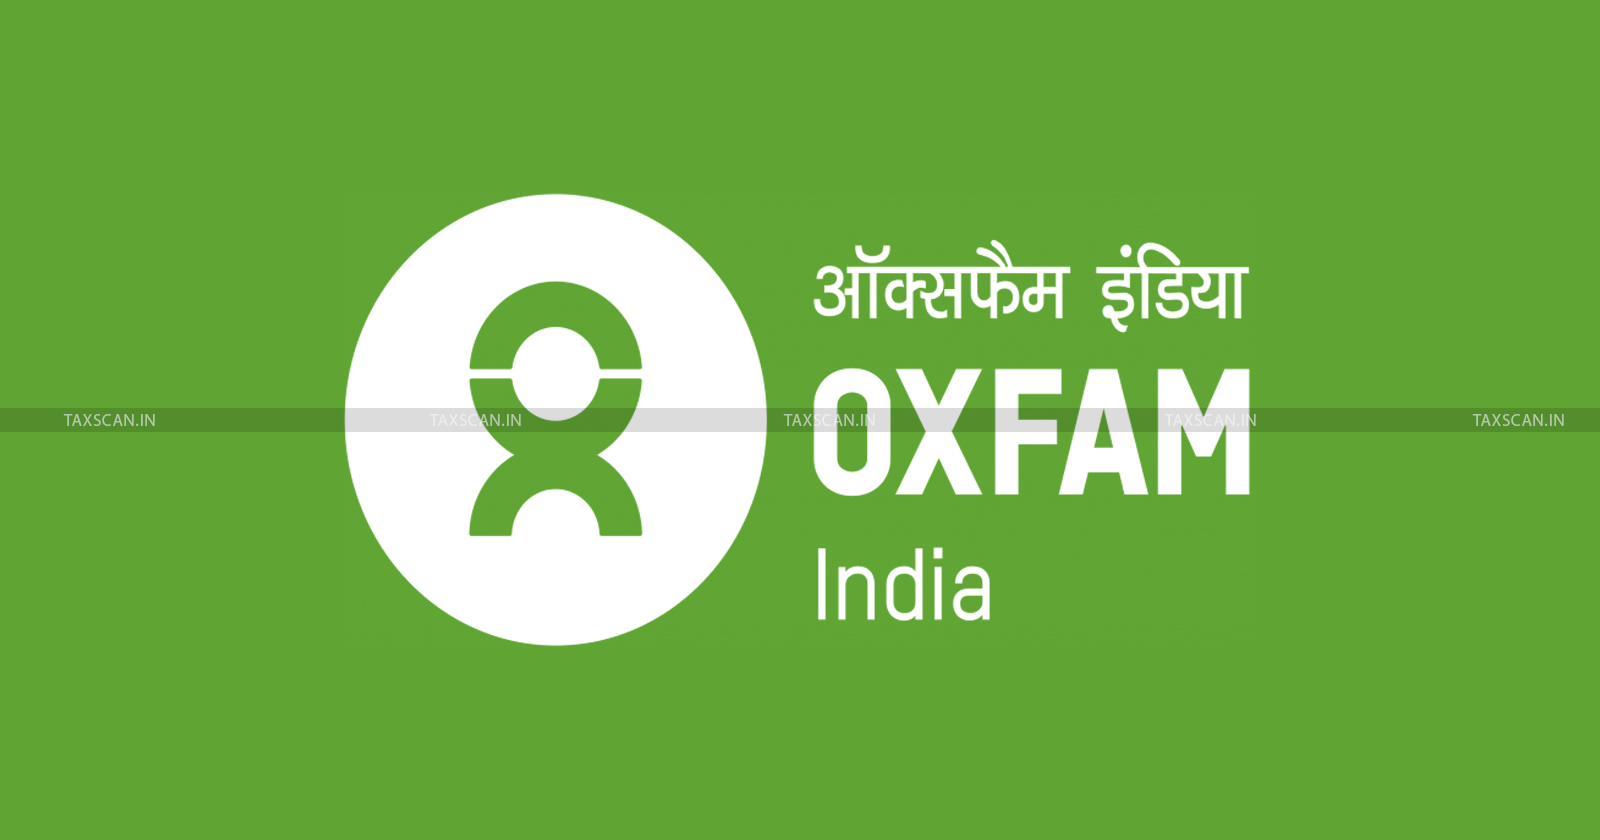 Income Tax - Tax exemption - Oxfam India - Delhi High Court - Income Tax Department - taxscan